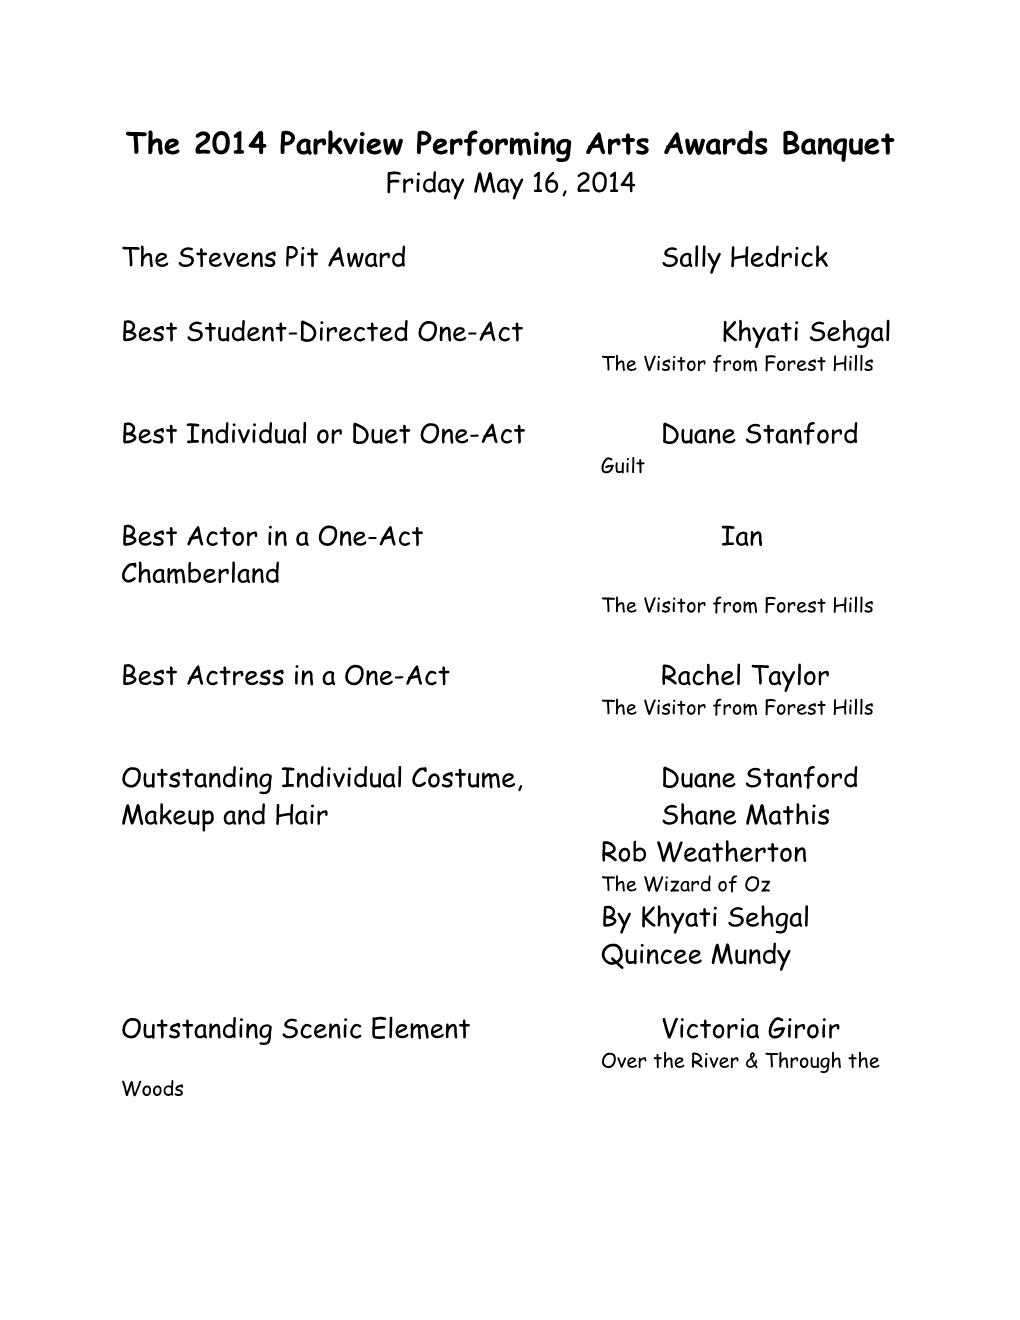 The 2014 Parkview Performing Arts Awards Banquet